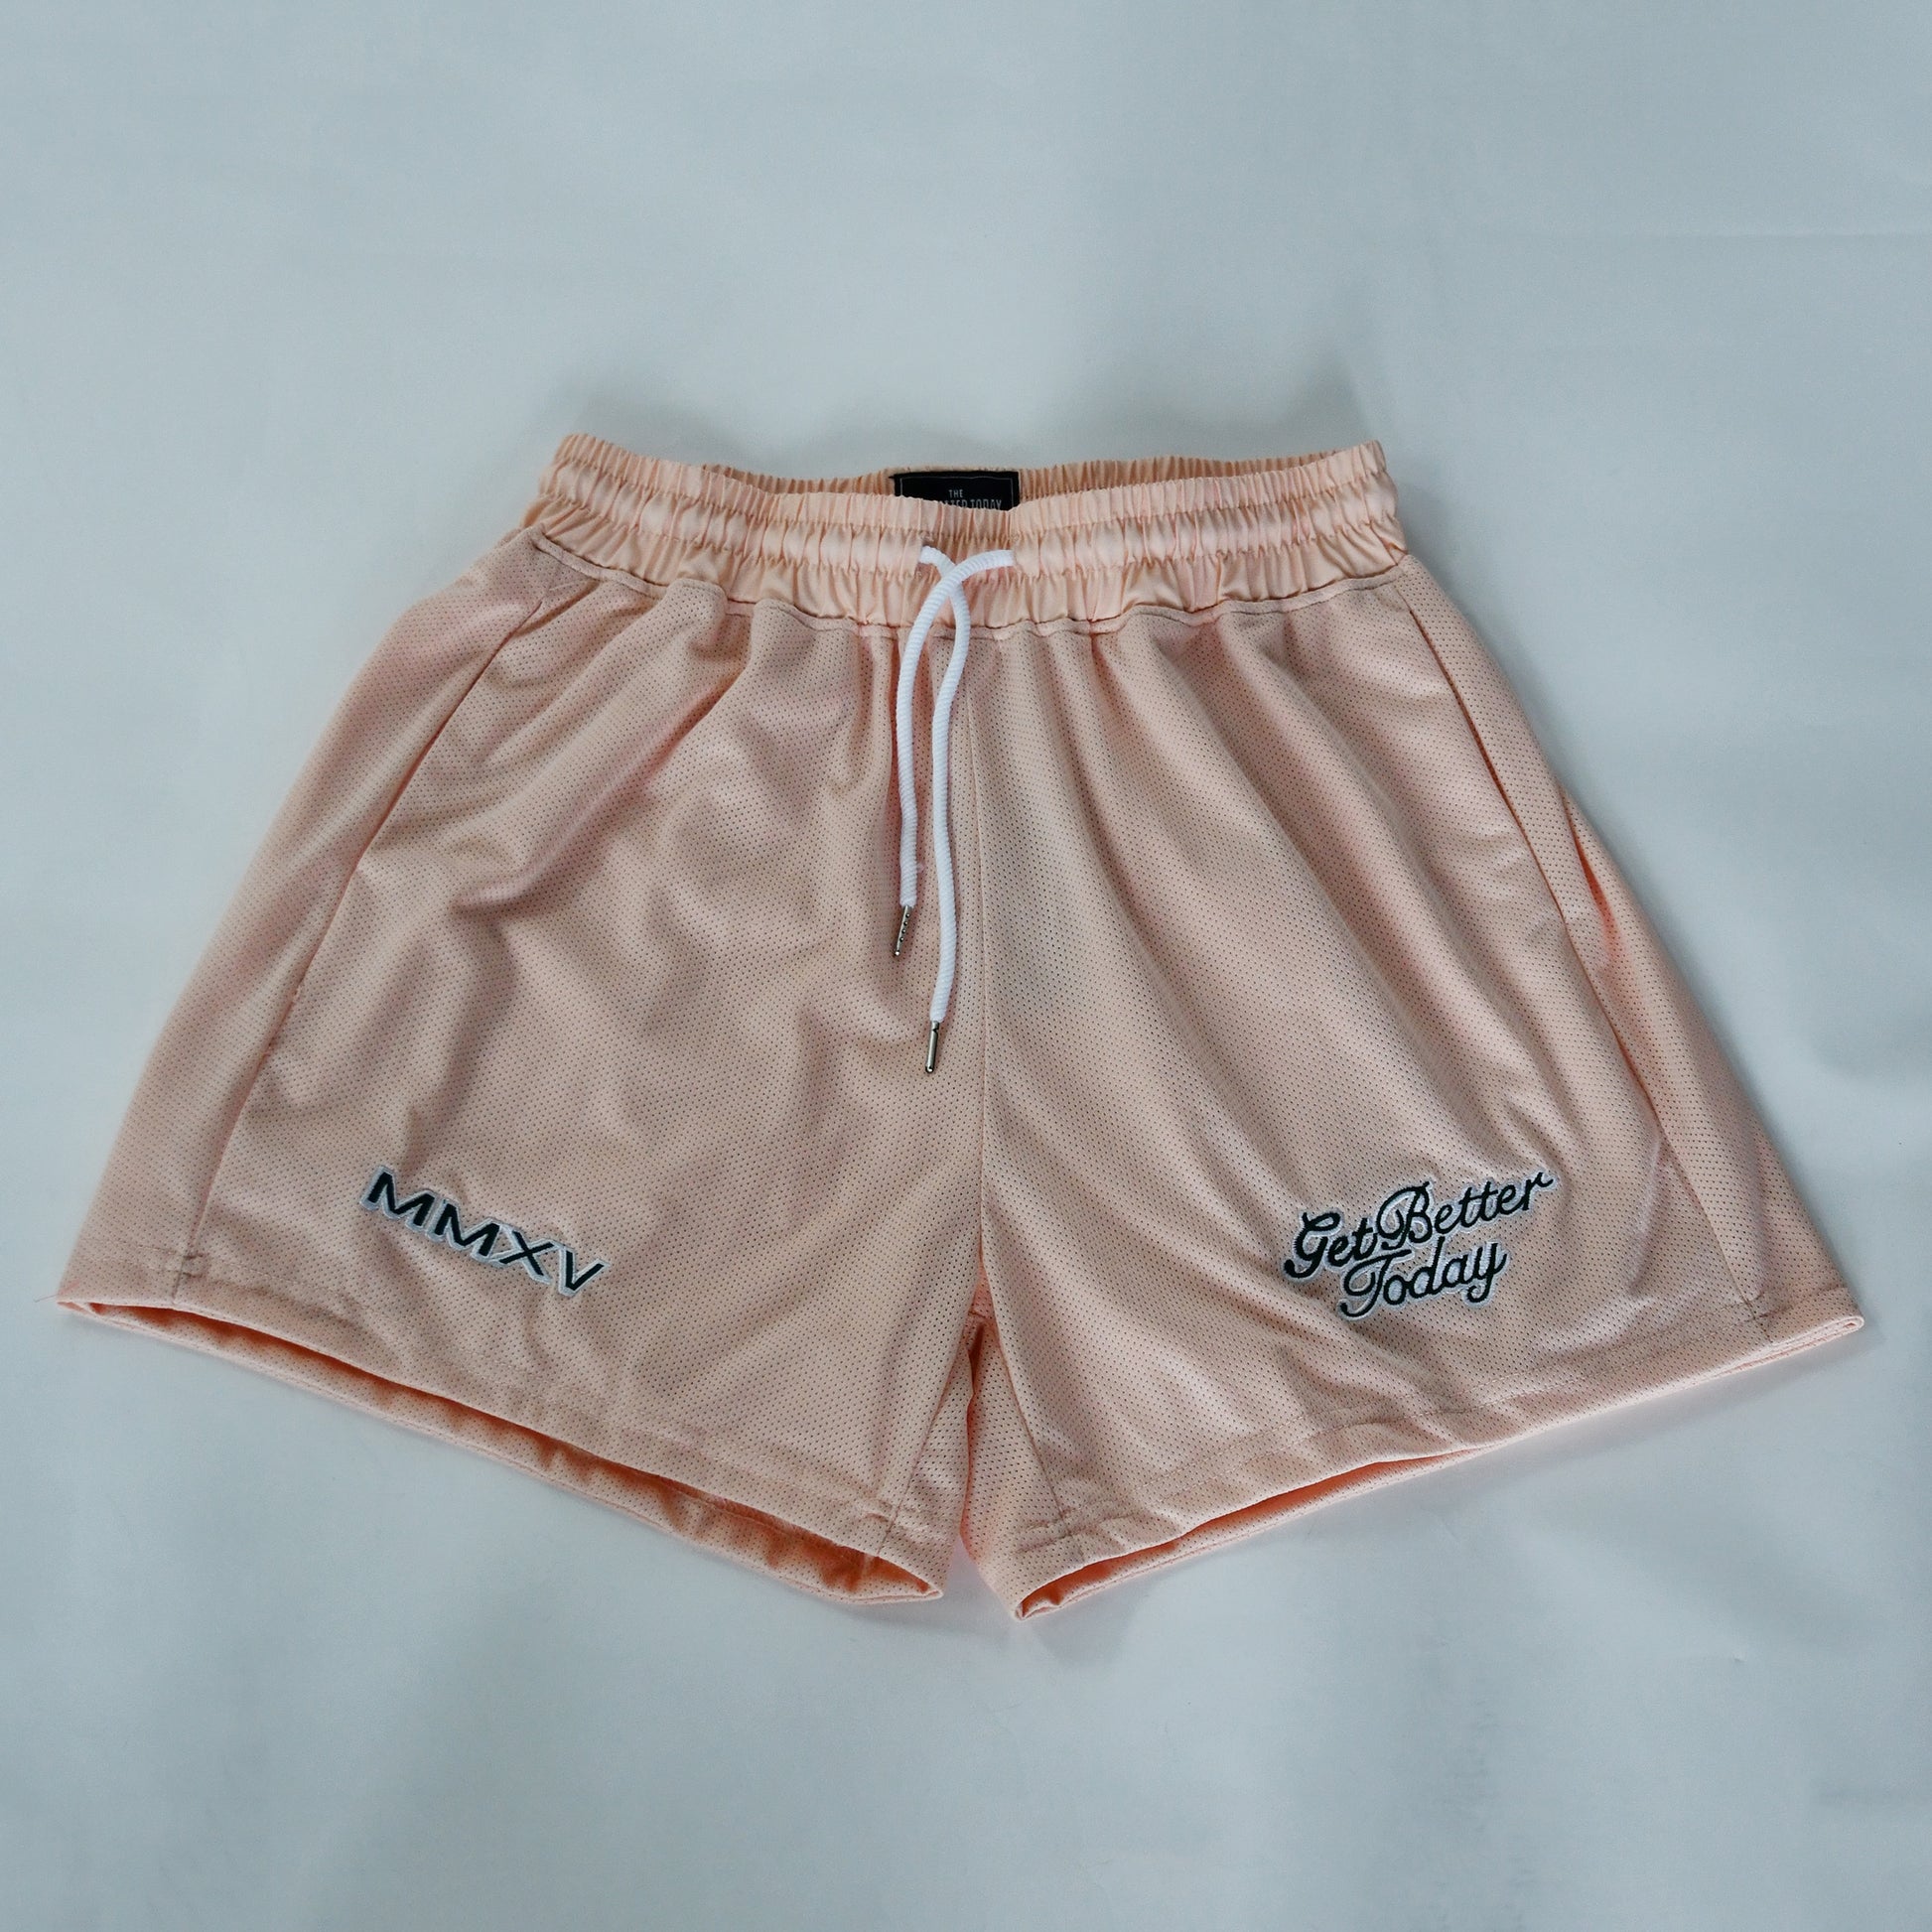 Men Gym Get Better Today Mesh Shorts Solid Apricot